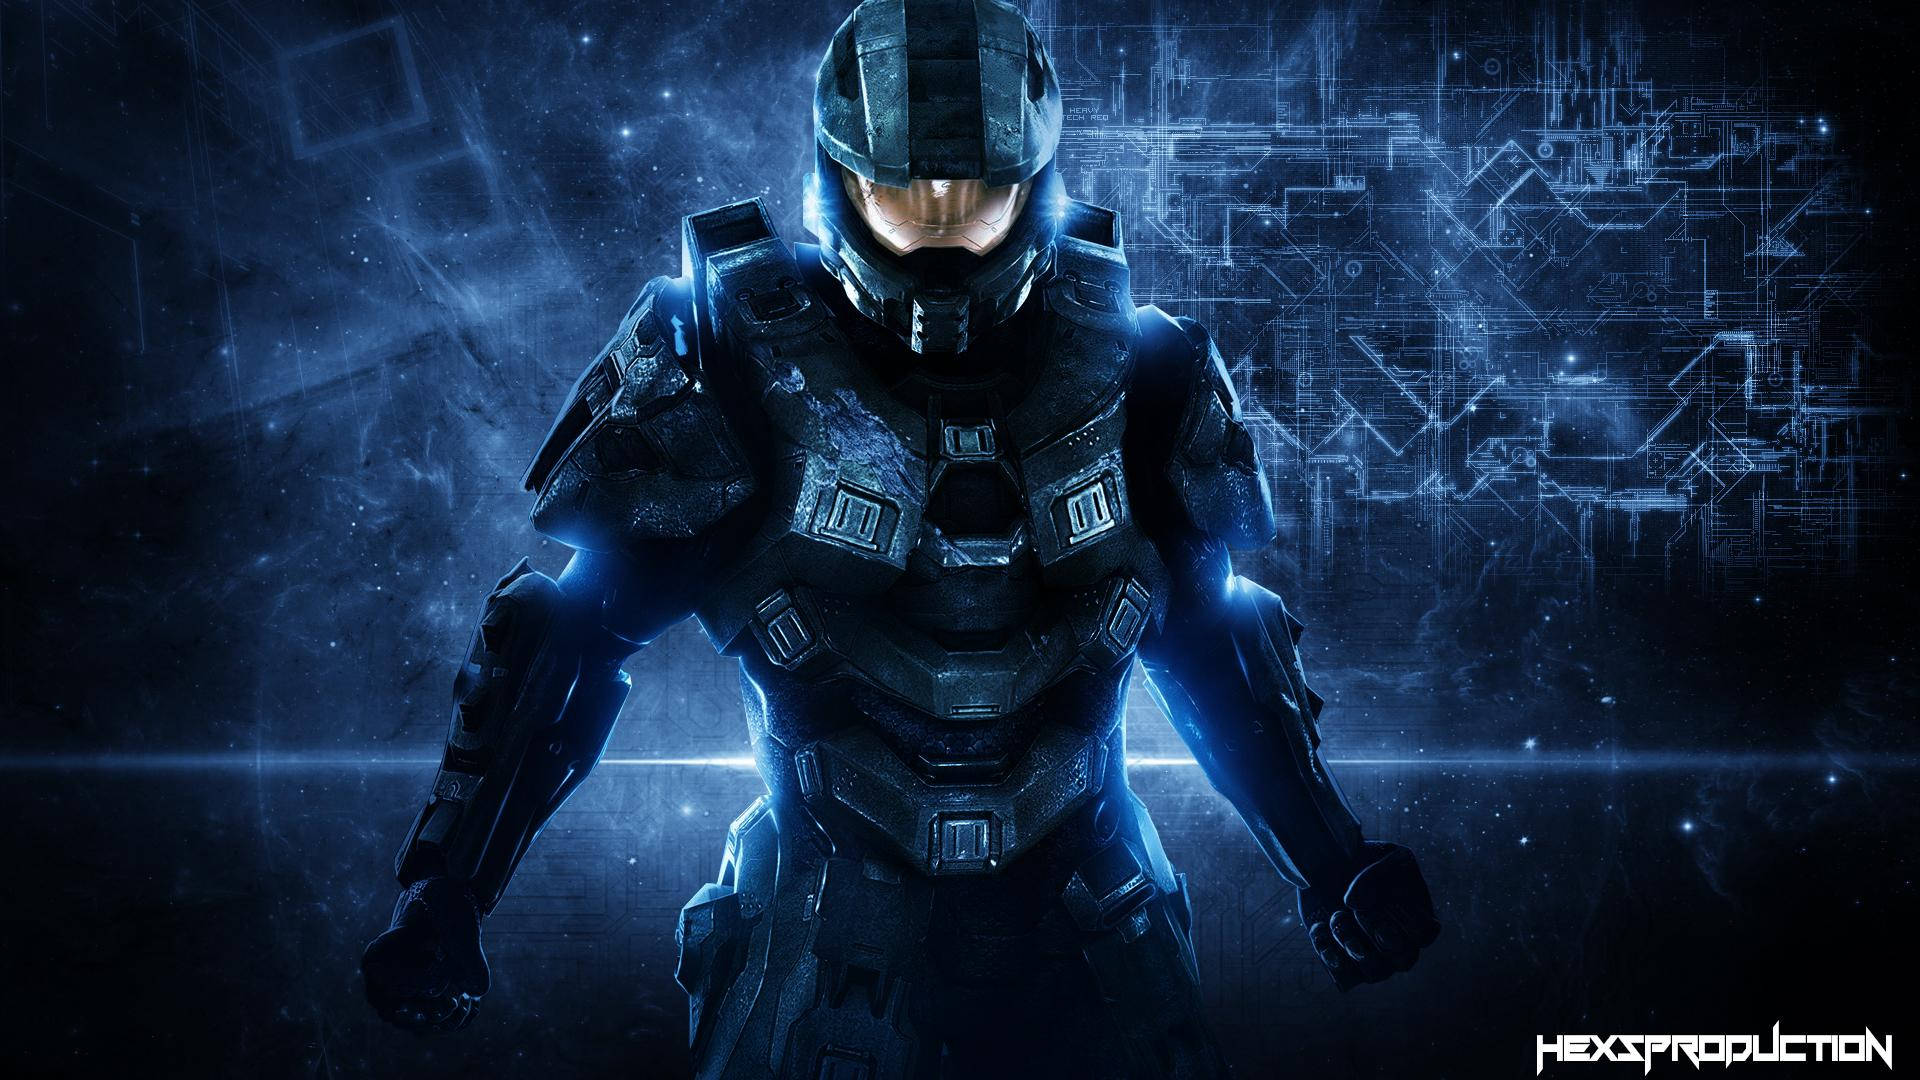 Join the fight against evil in Halo Wallpaper